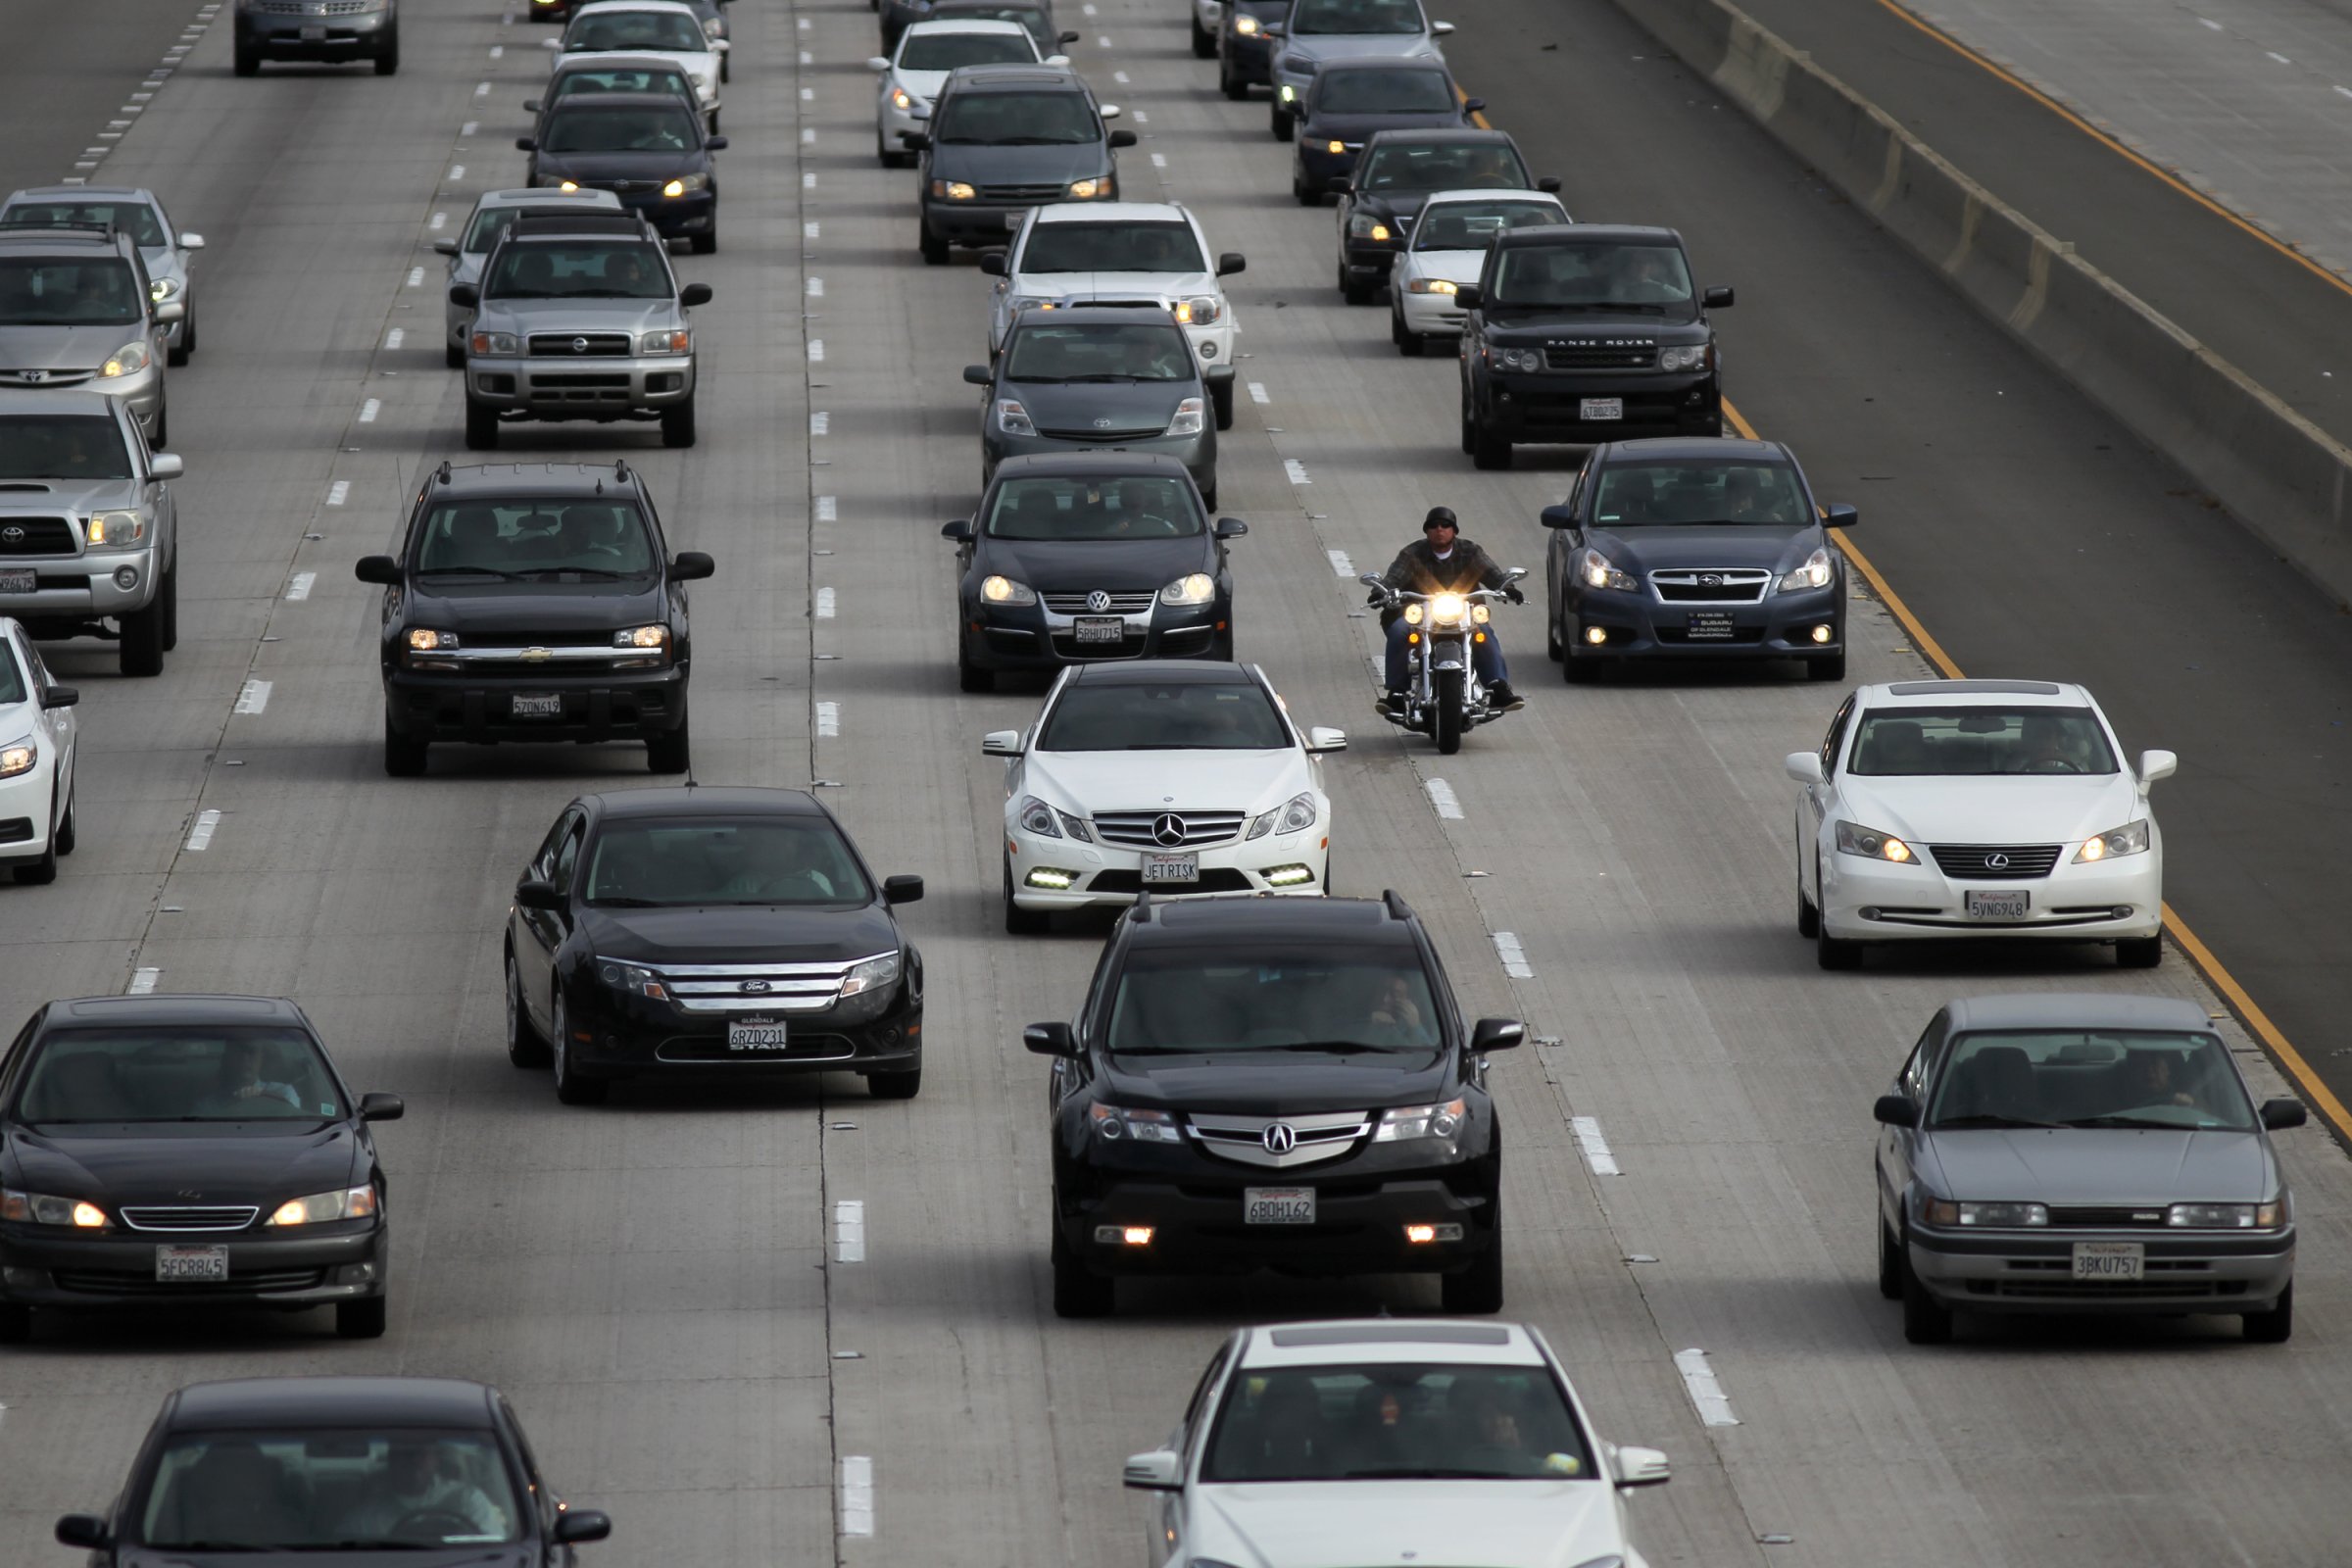 Report Places Los Angeles At Top Of List For City With Worst Traffic And Smog